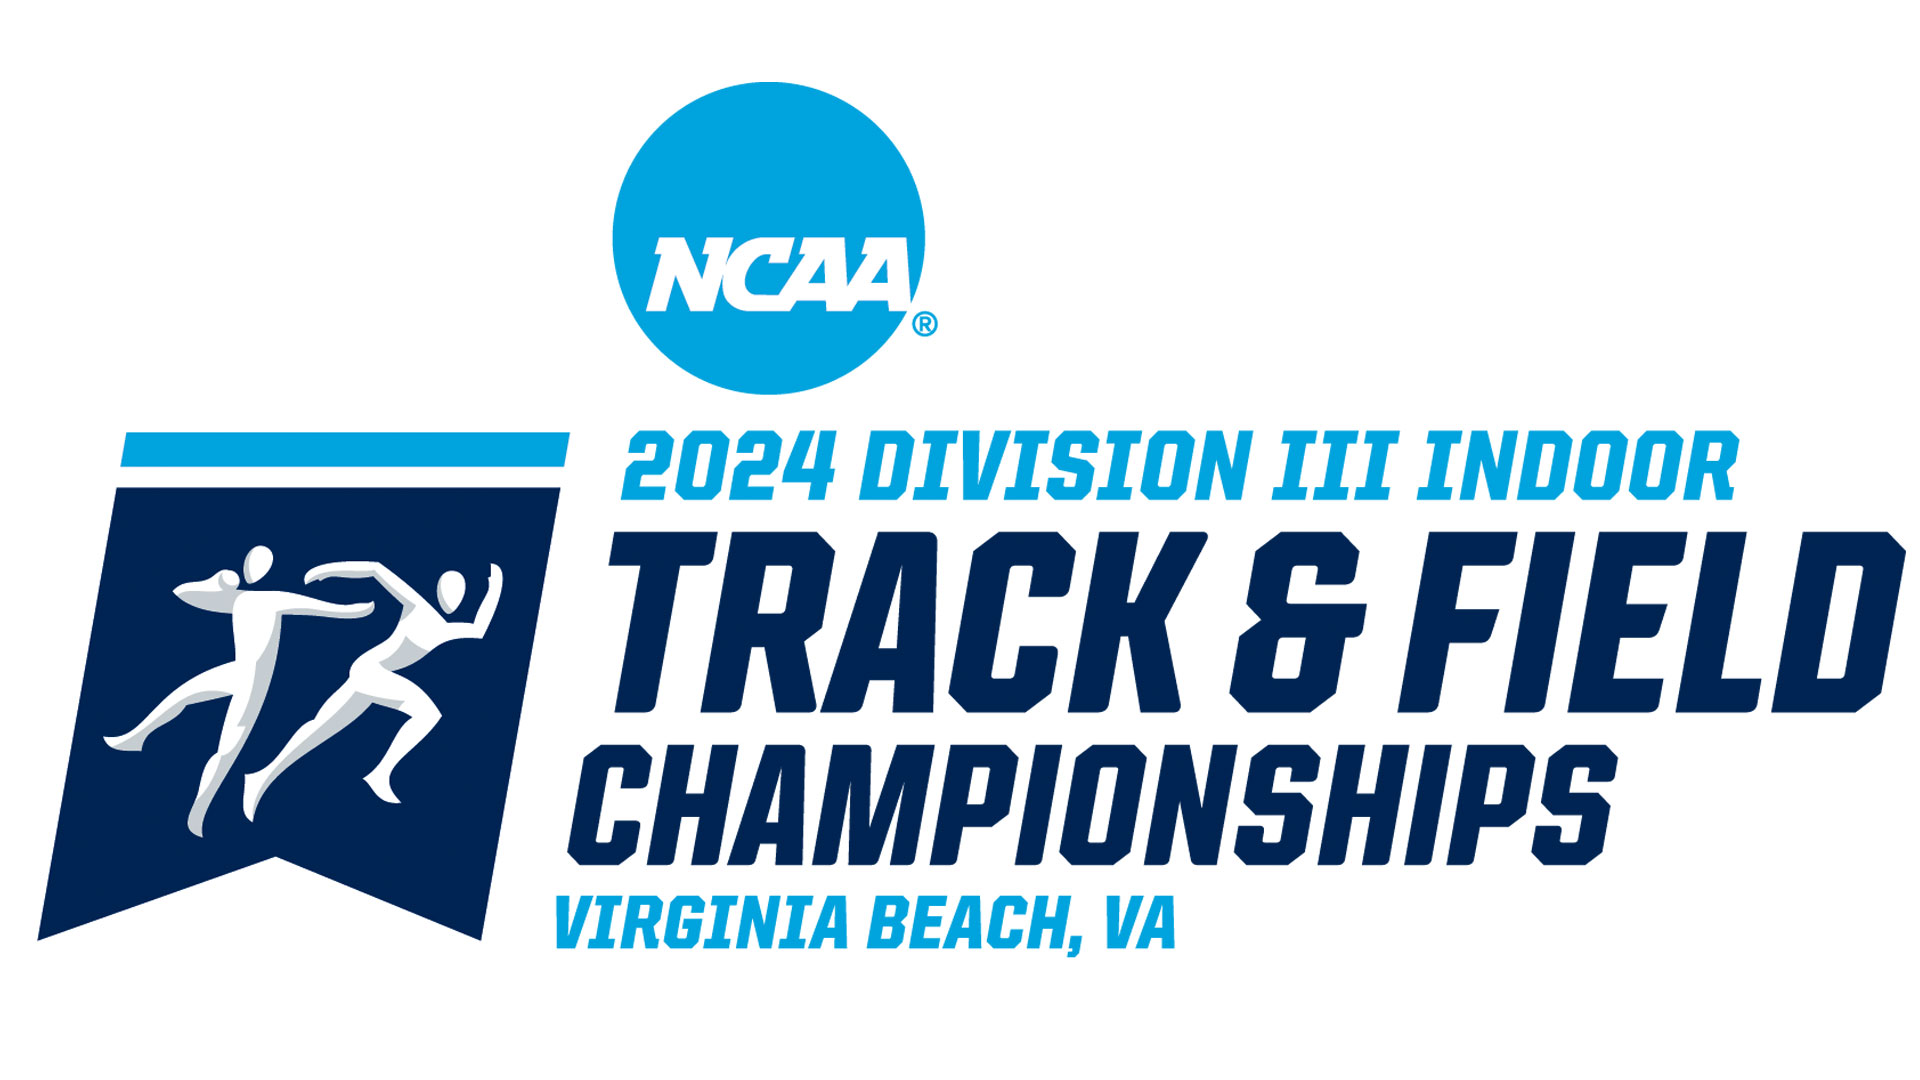 logo of 2024 Division III Indoor Track and Field Championships hosted in Virginia Beach, VA